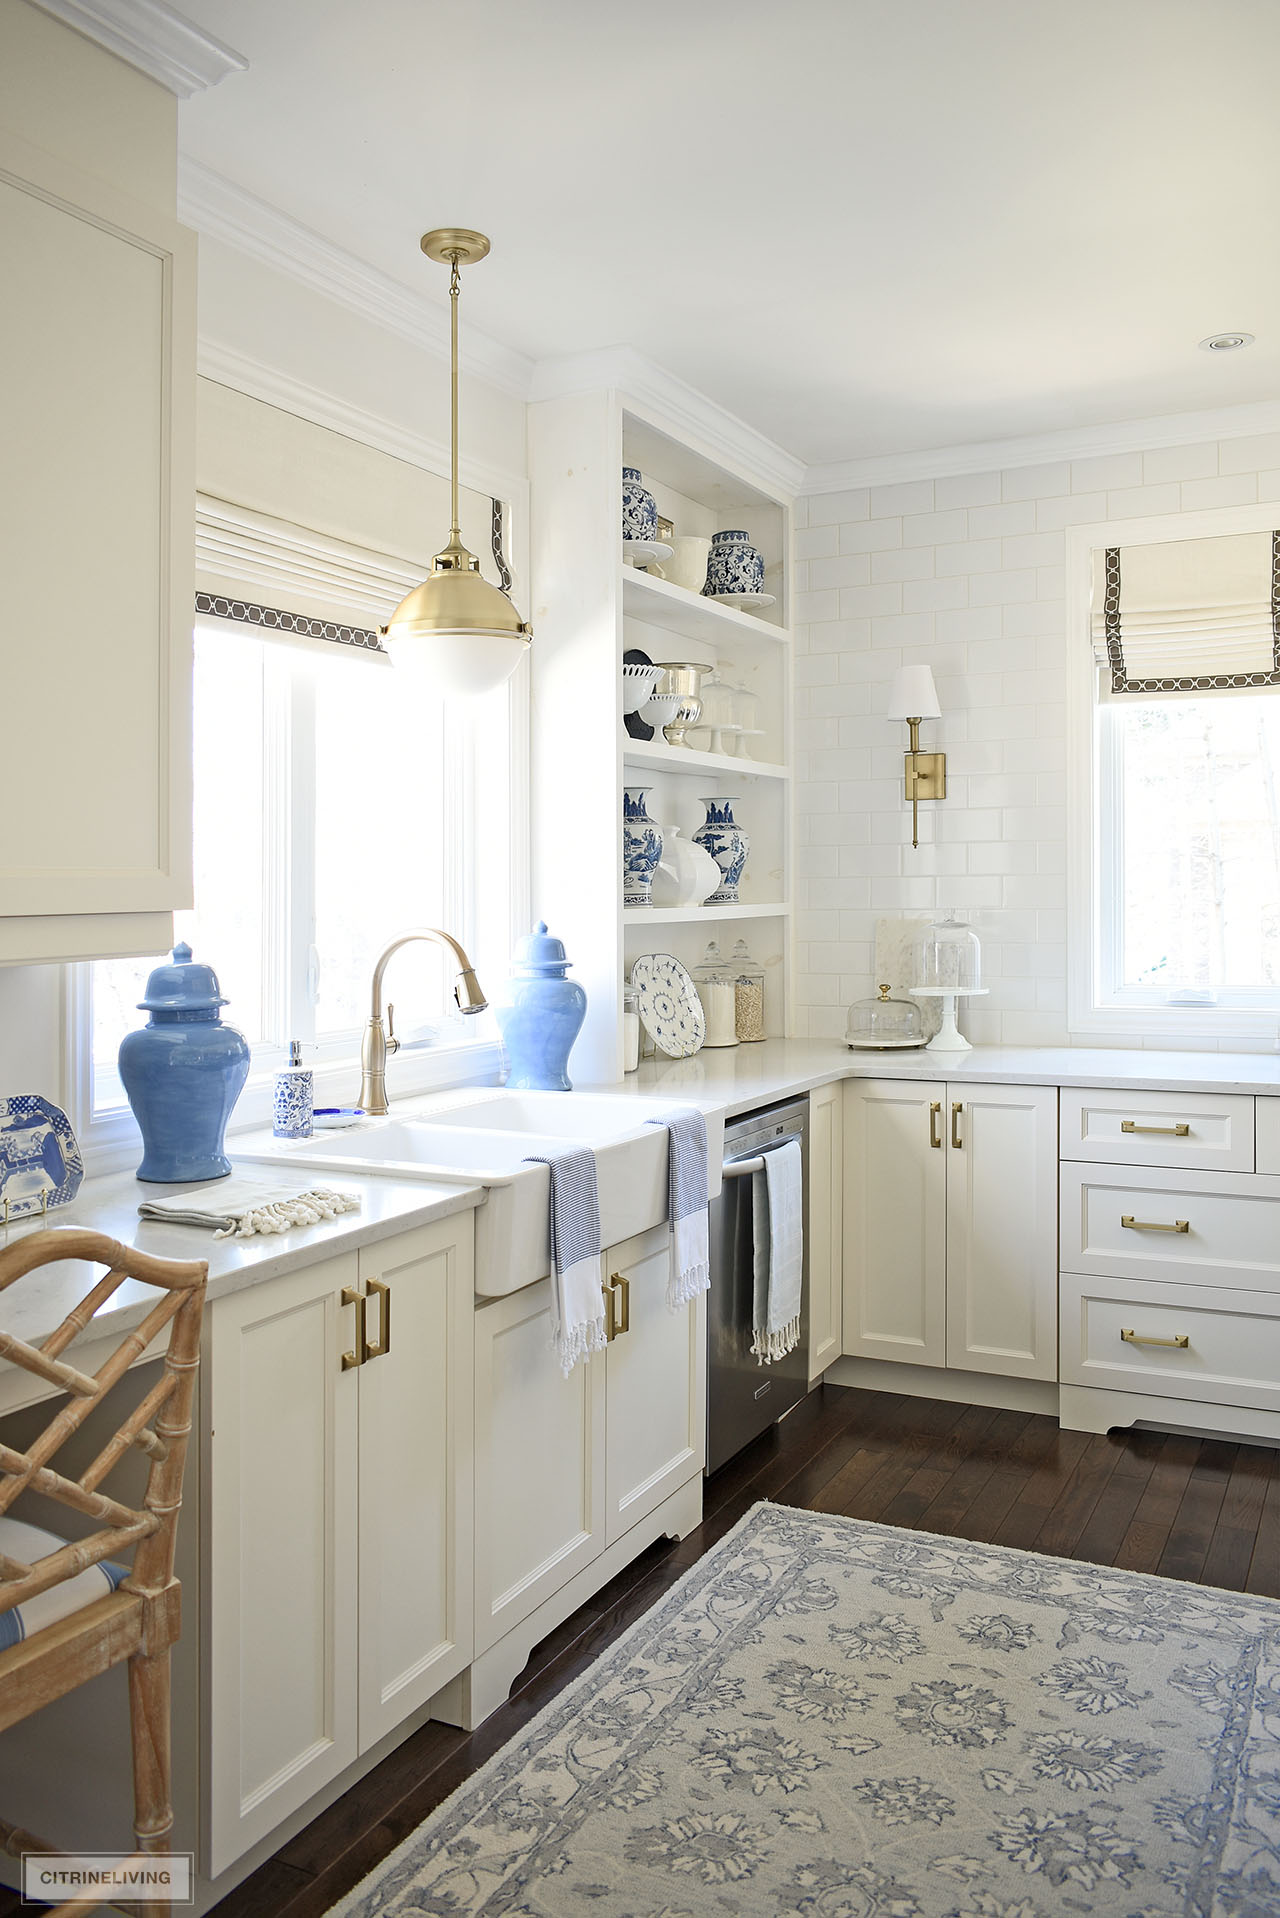 Kitchen sink and open shelving decorated with a beautiful blue and white color palette.